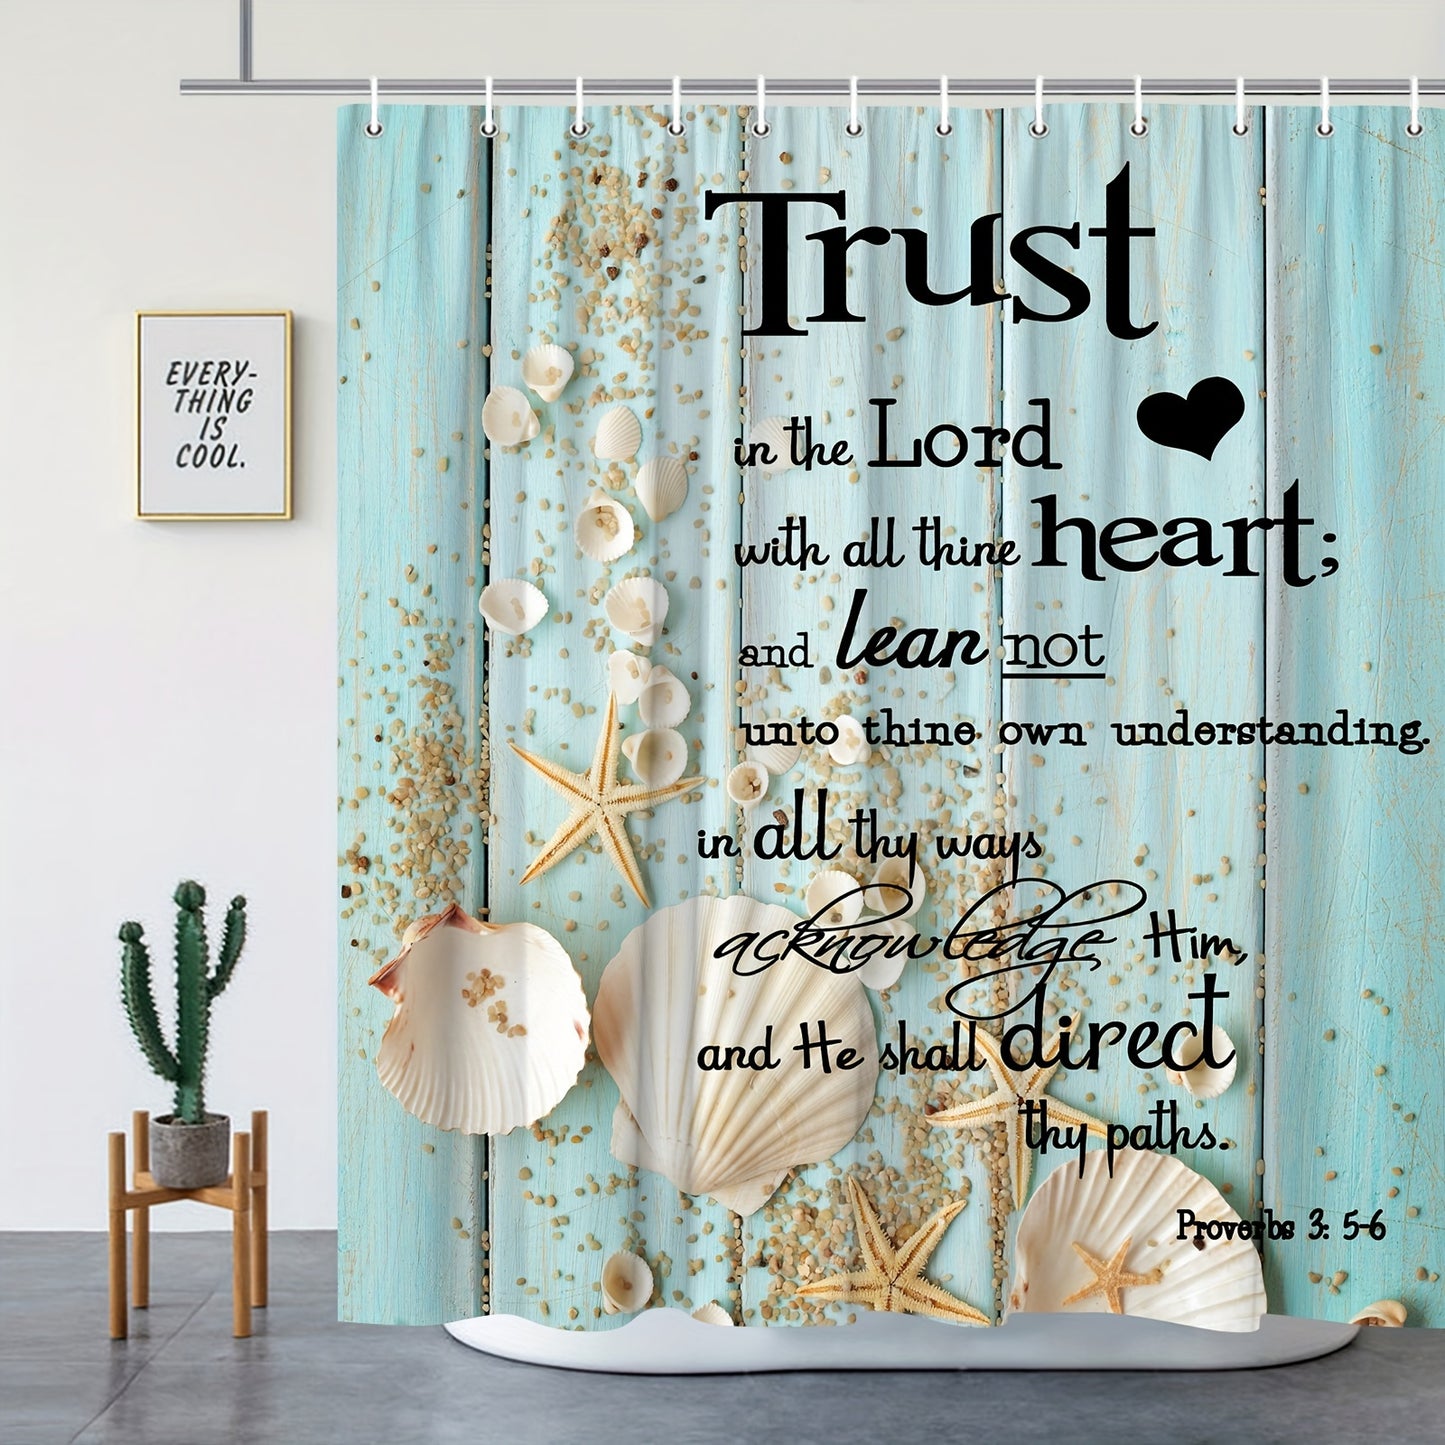 Trust In The Lord (seashells) Christian Shower Curtain Curtain With Hooks claimedbygoddesigns